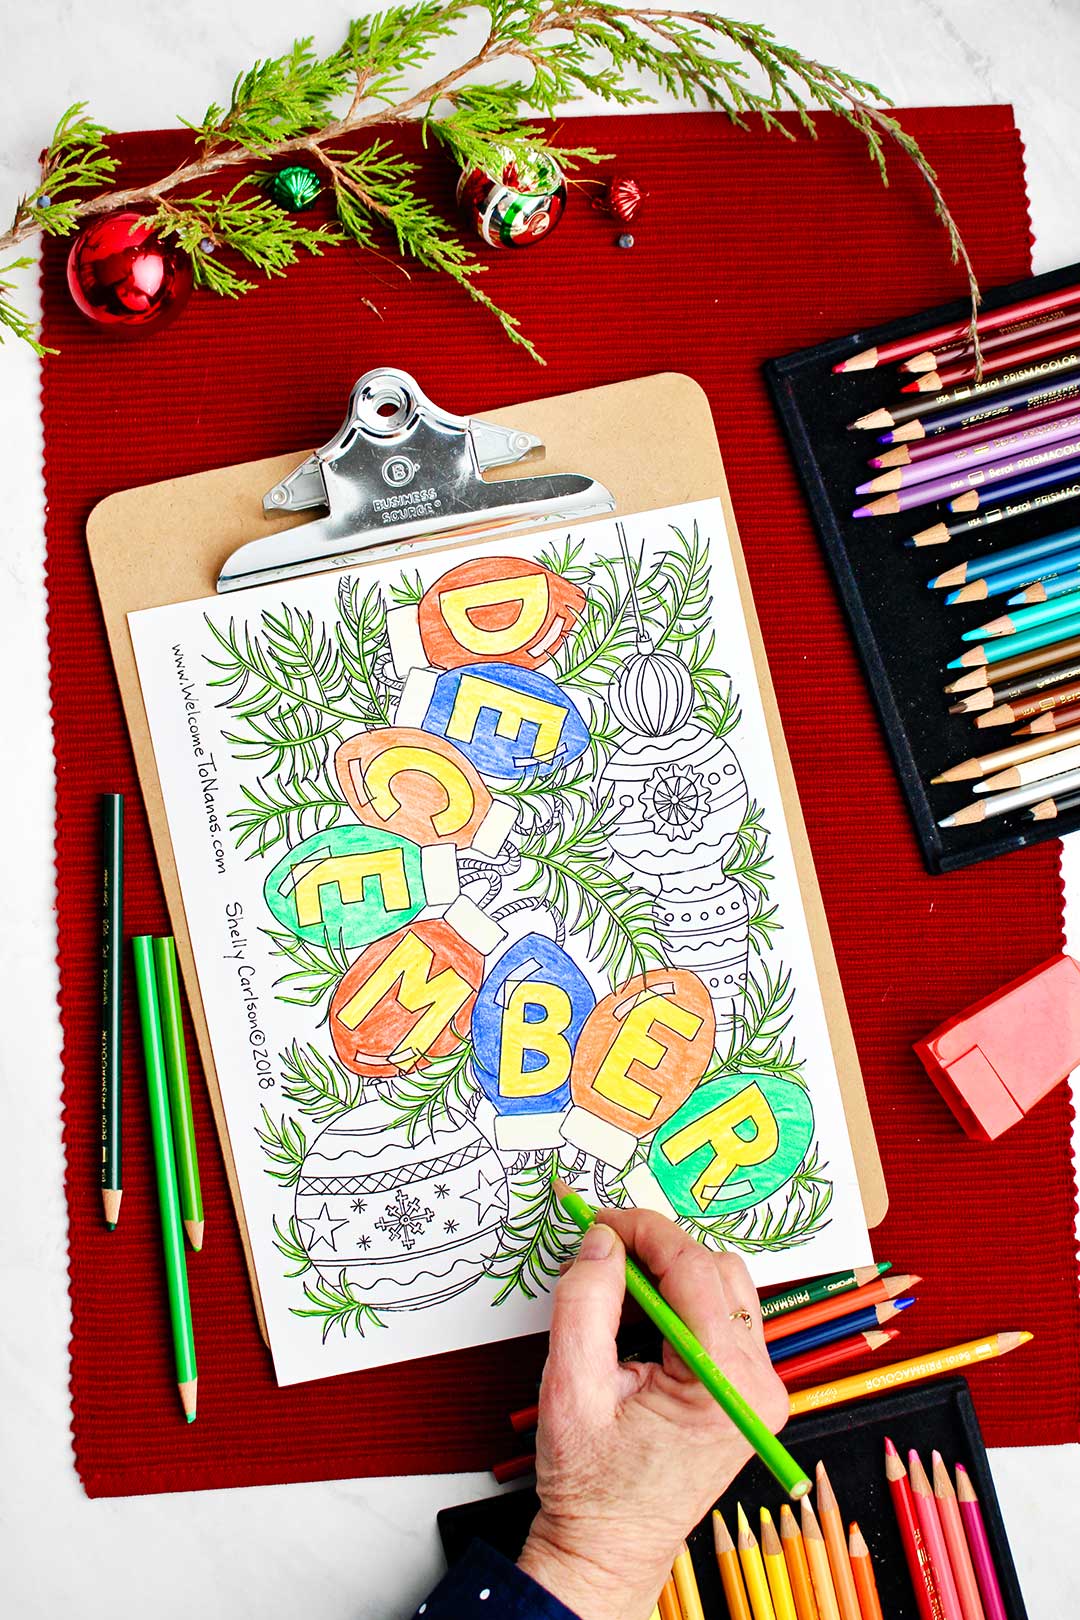 Hand coloring some greenery in the December coloring page with colored pencils and holiday decorations near by.